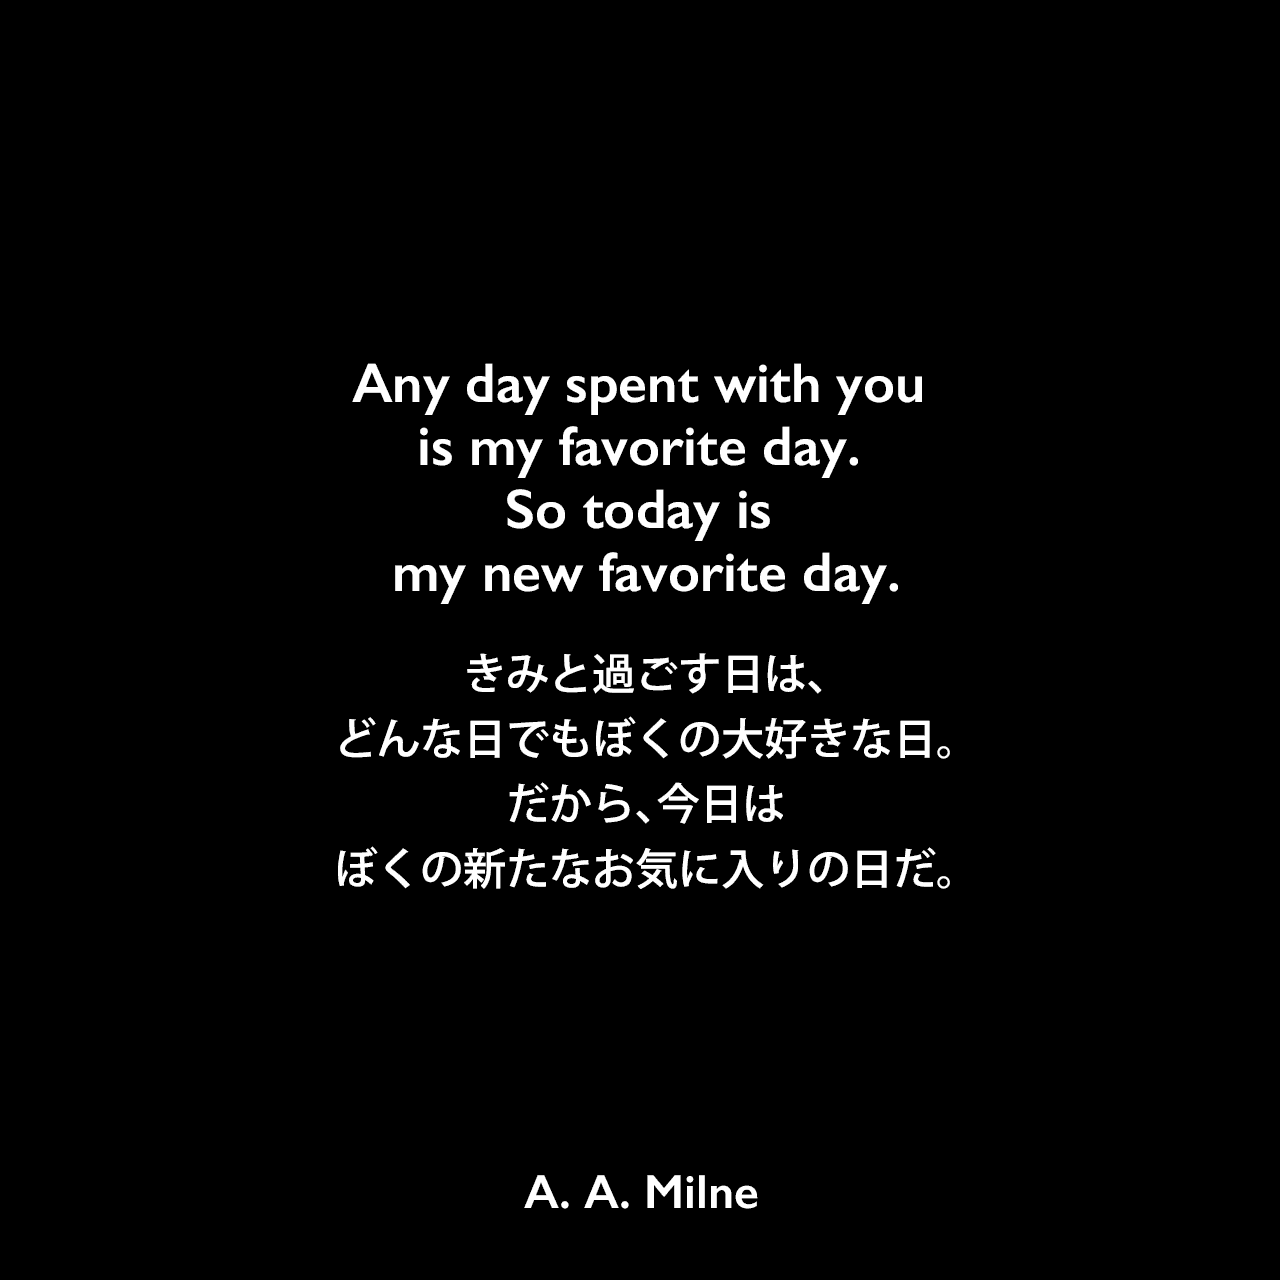 Any day spent with you is my favorite day. So today is my new favorite day.きみと過ごす日は、どんな日でもぼくの大好きな日。だから、今日はぼくの新たなお気に入りの日だ。A. A. Milne